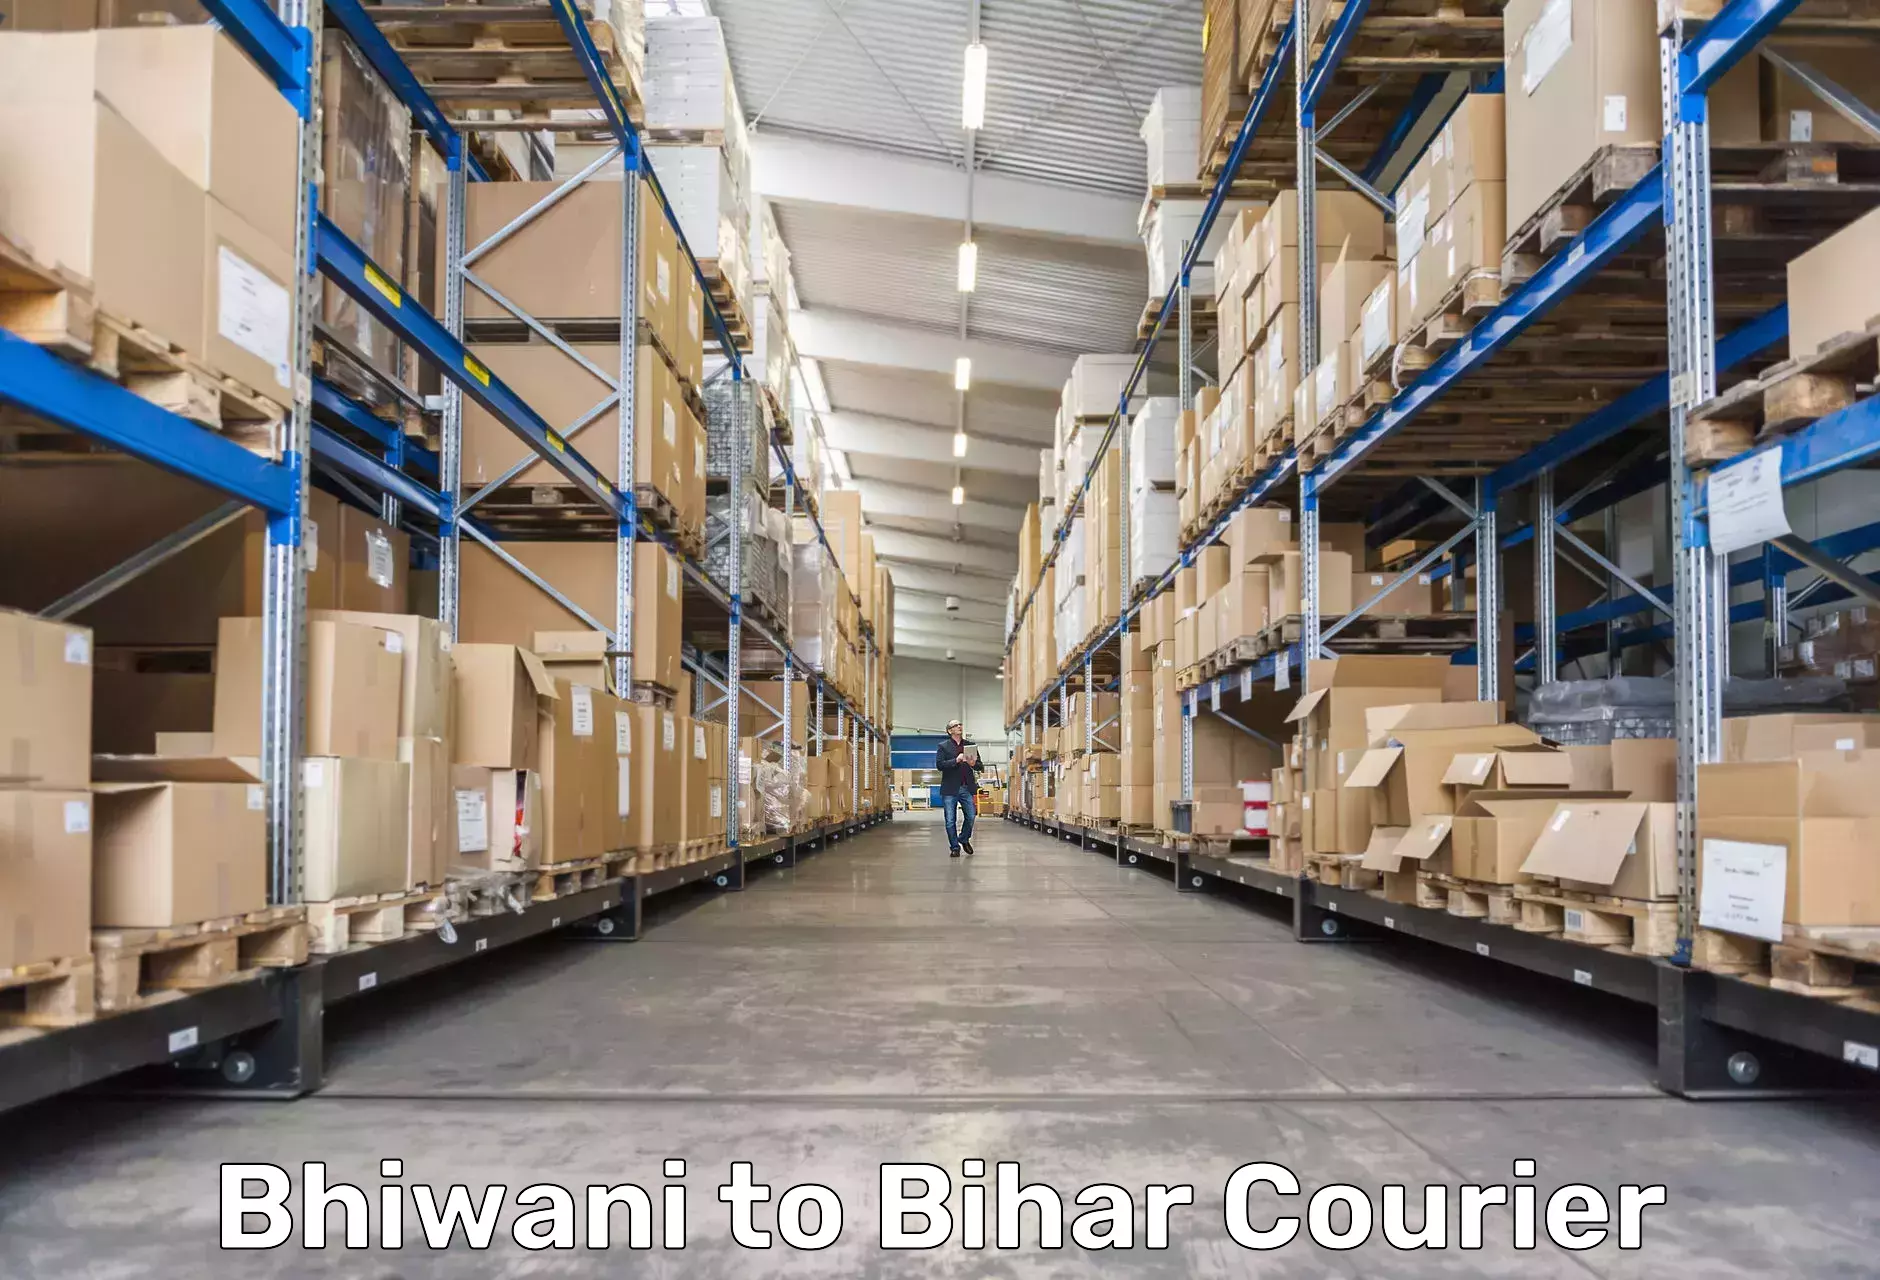 Courier services in Bhiwani to Banmankhi Bazar